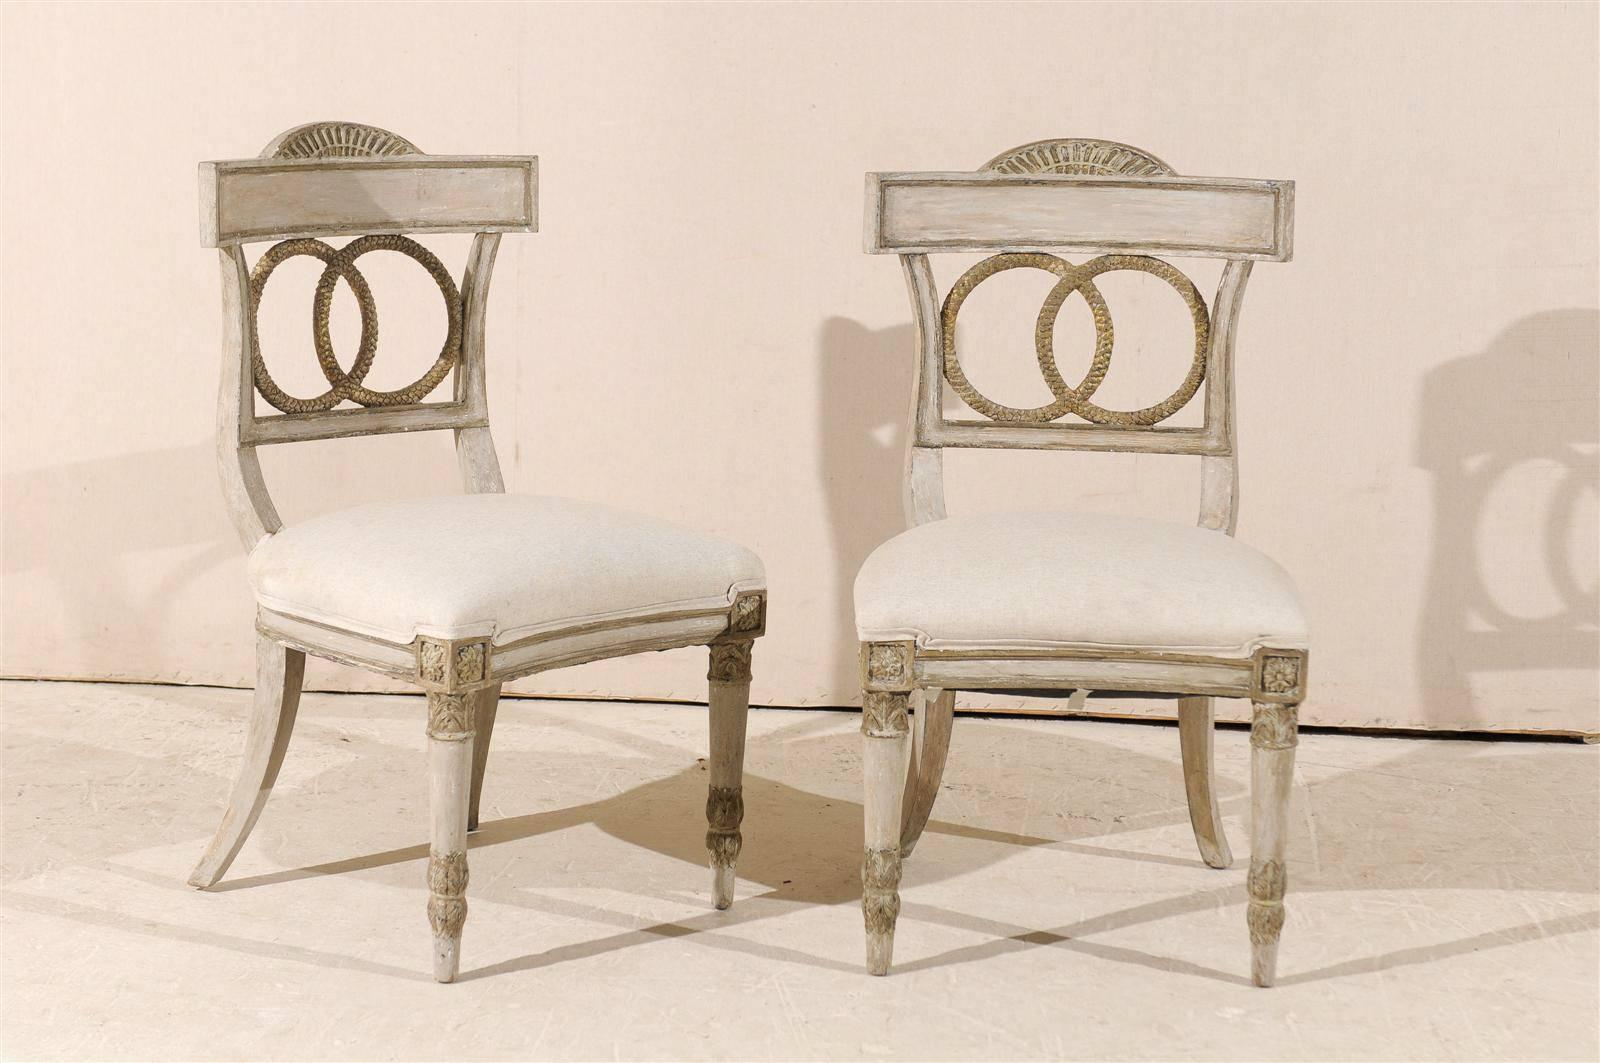 A set of four European painted wood and upholstered side chairs from the 20th century with carved ring splats, tapered front and saber back legs and rosettes on the knees.